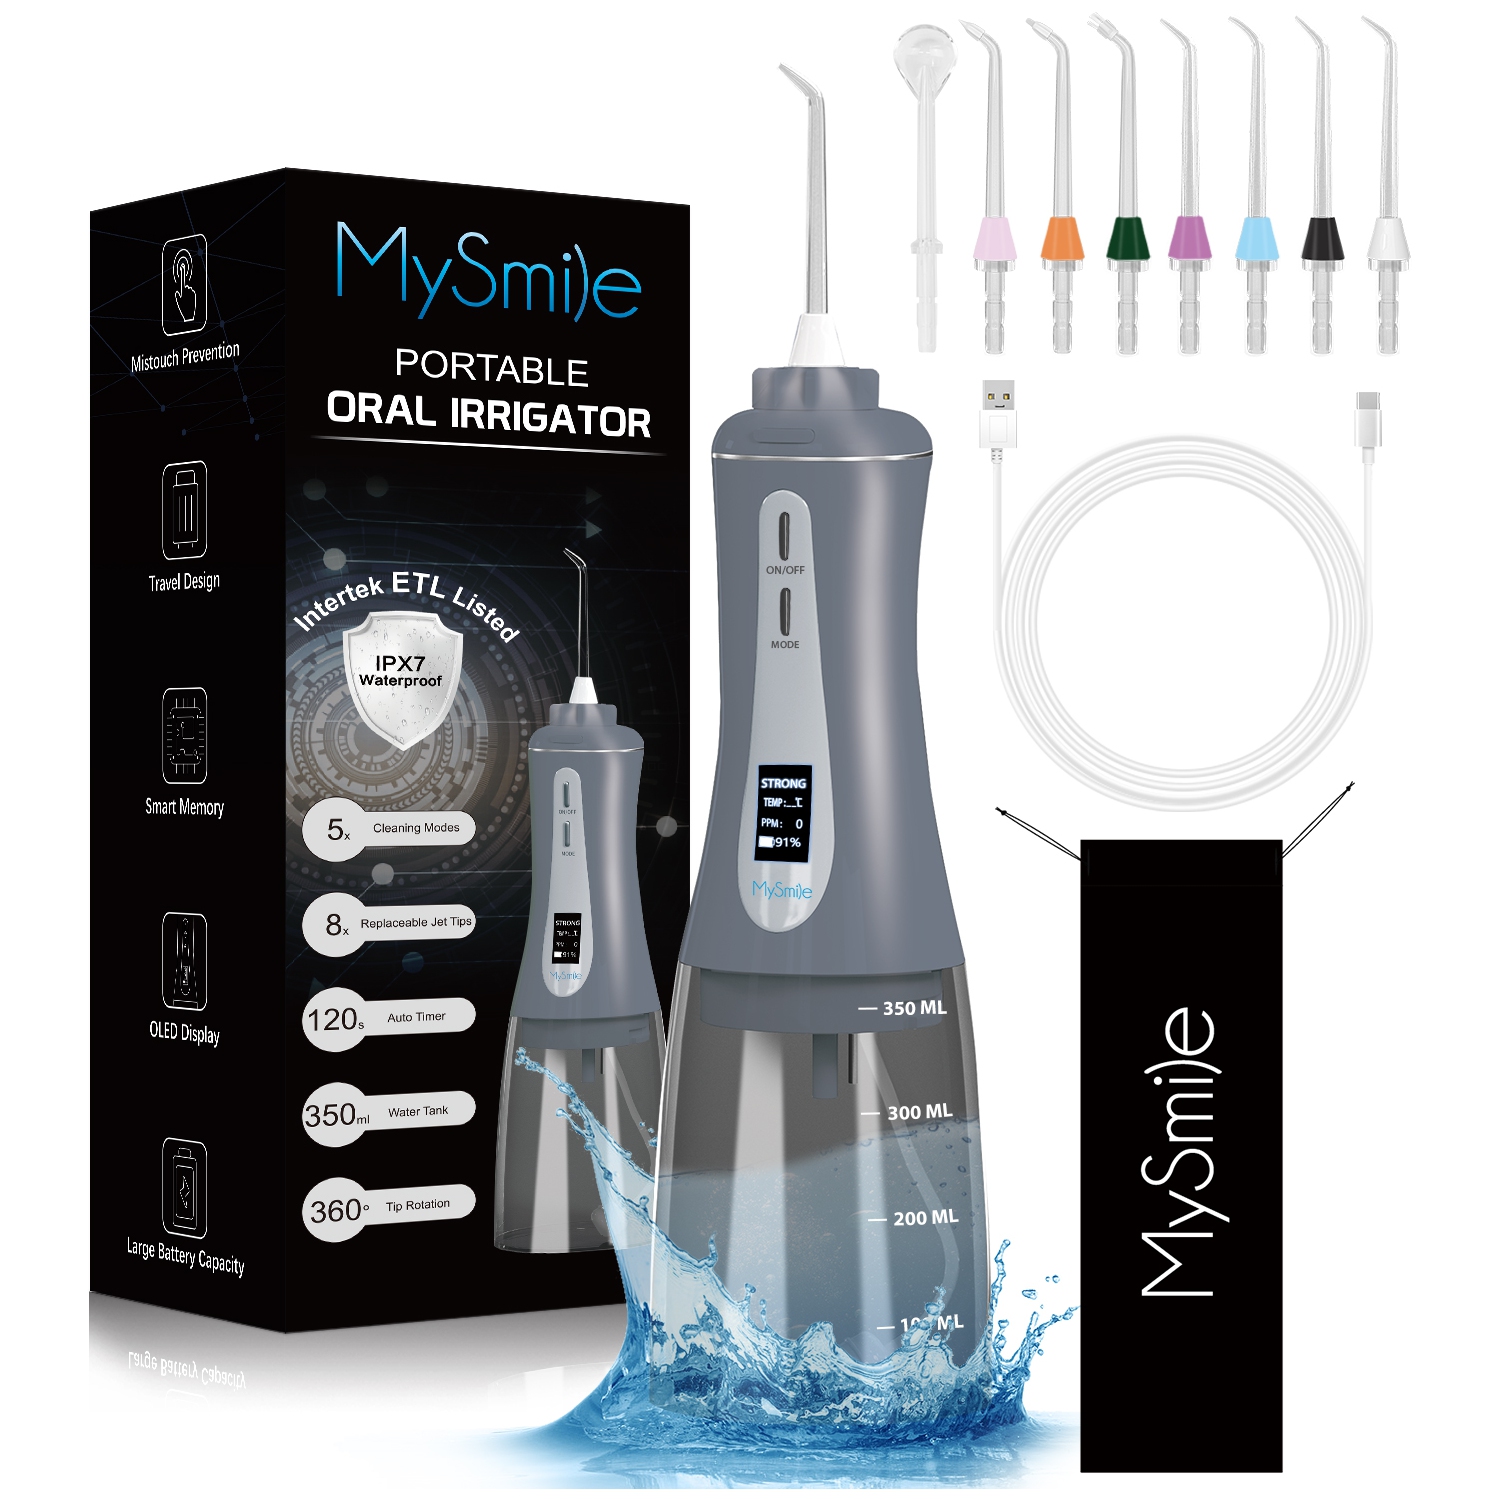 MySmile Powerful Cordless 350ML Water Dental Flosser Portable OLED Display Oral Irrigator with 5 Pressure Modes 8 Replaceable Jet Tips and Storage Bag for Home Travel Use (Gray)